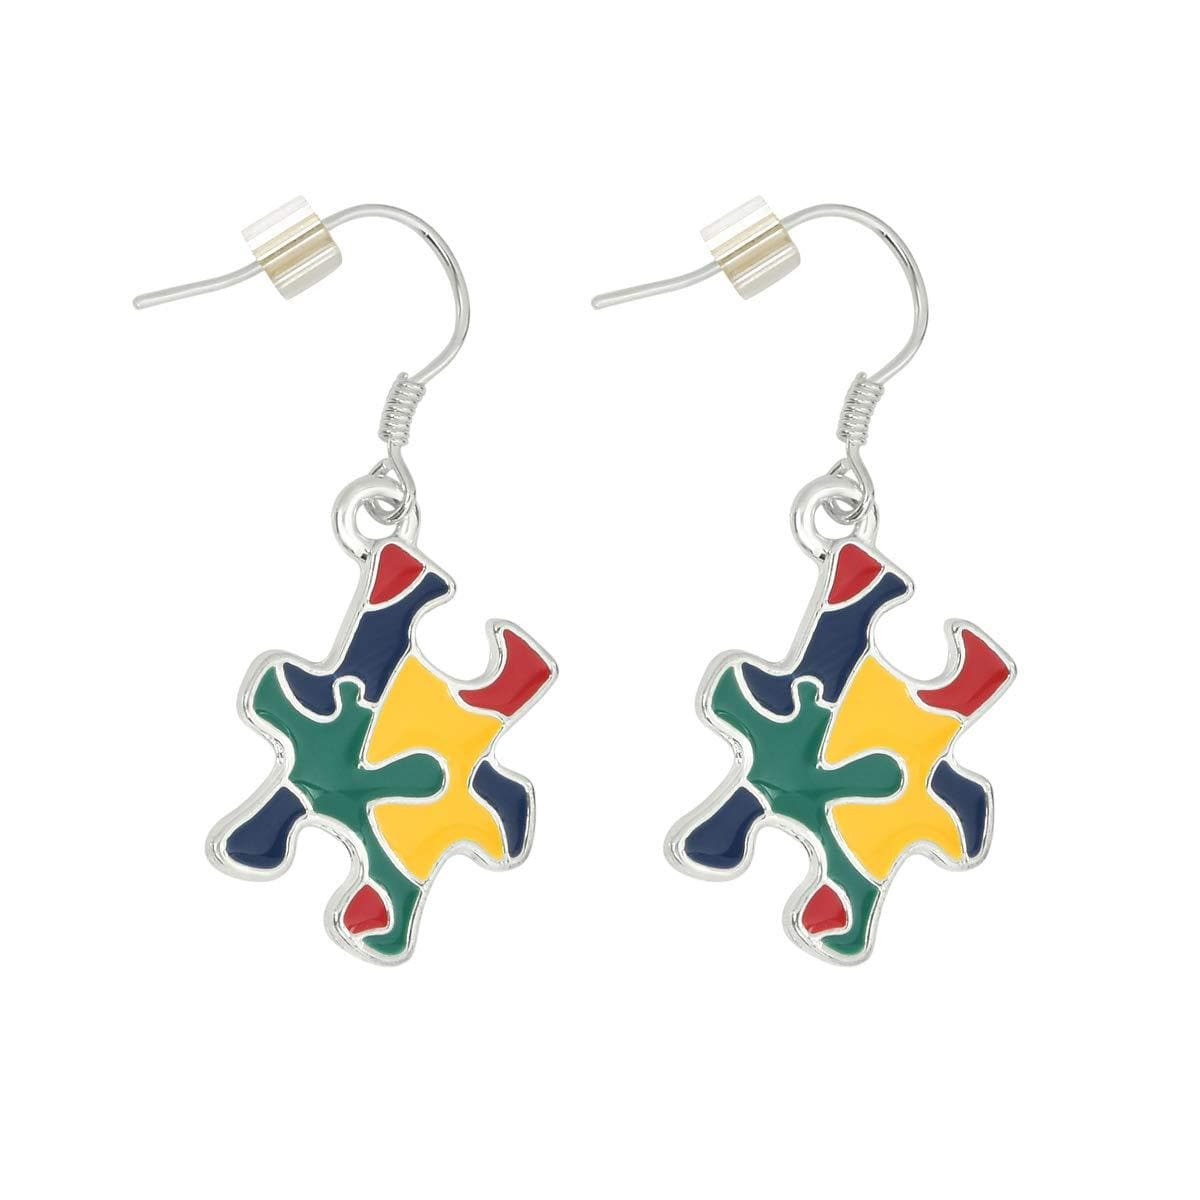 Hanging Autism Colored Puzzle Piece Earrings - The House of Awareness